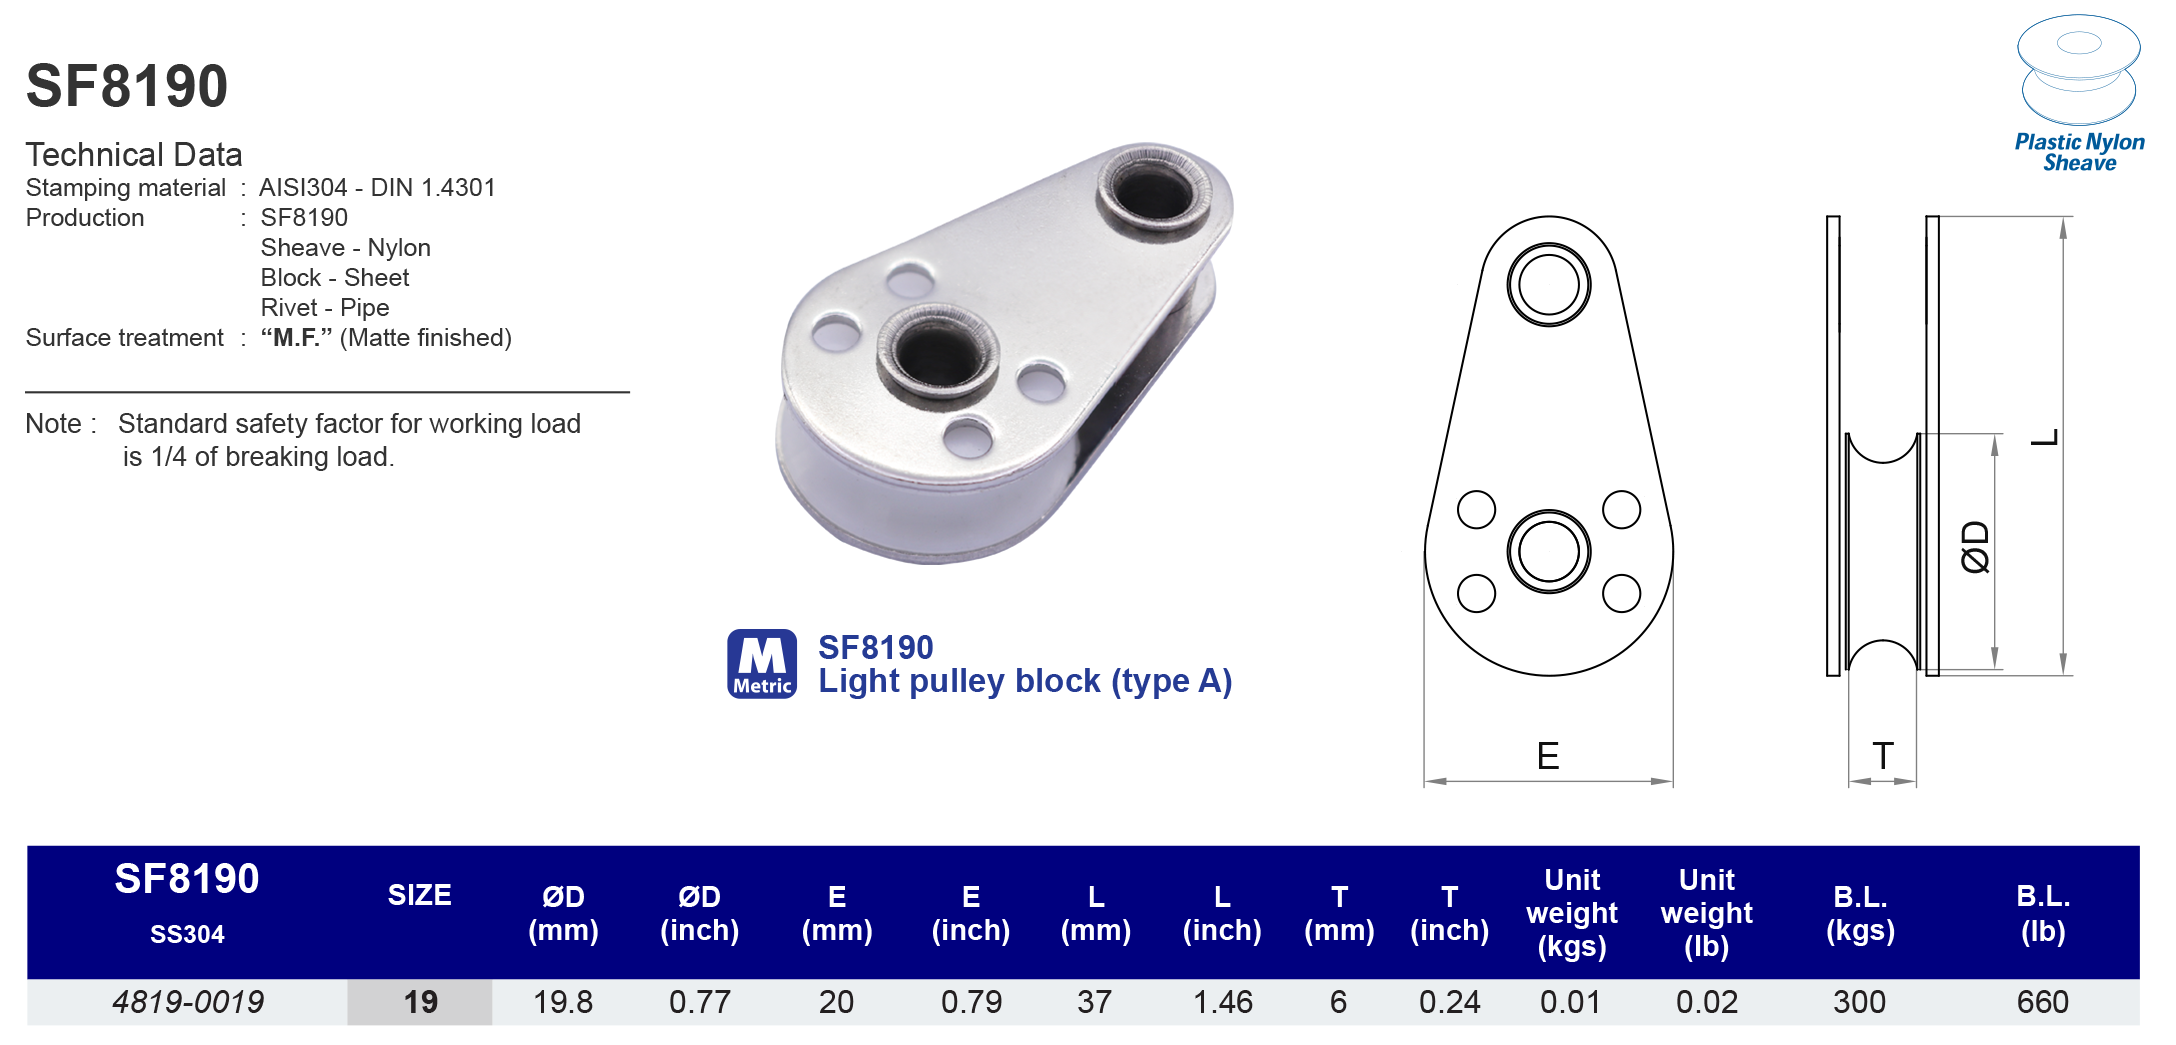 SF8190 Light pulley block (type A) - 304